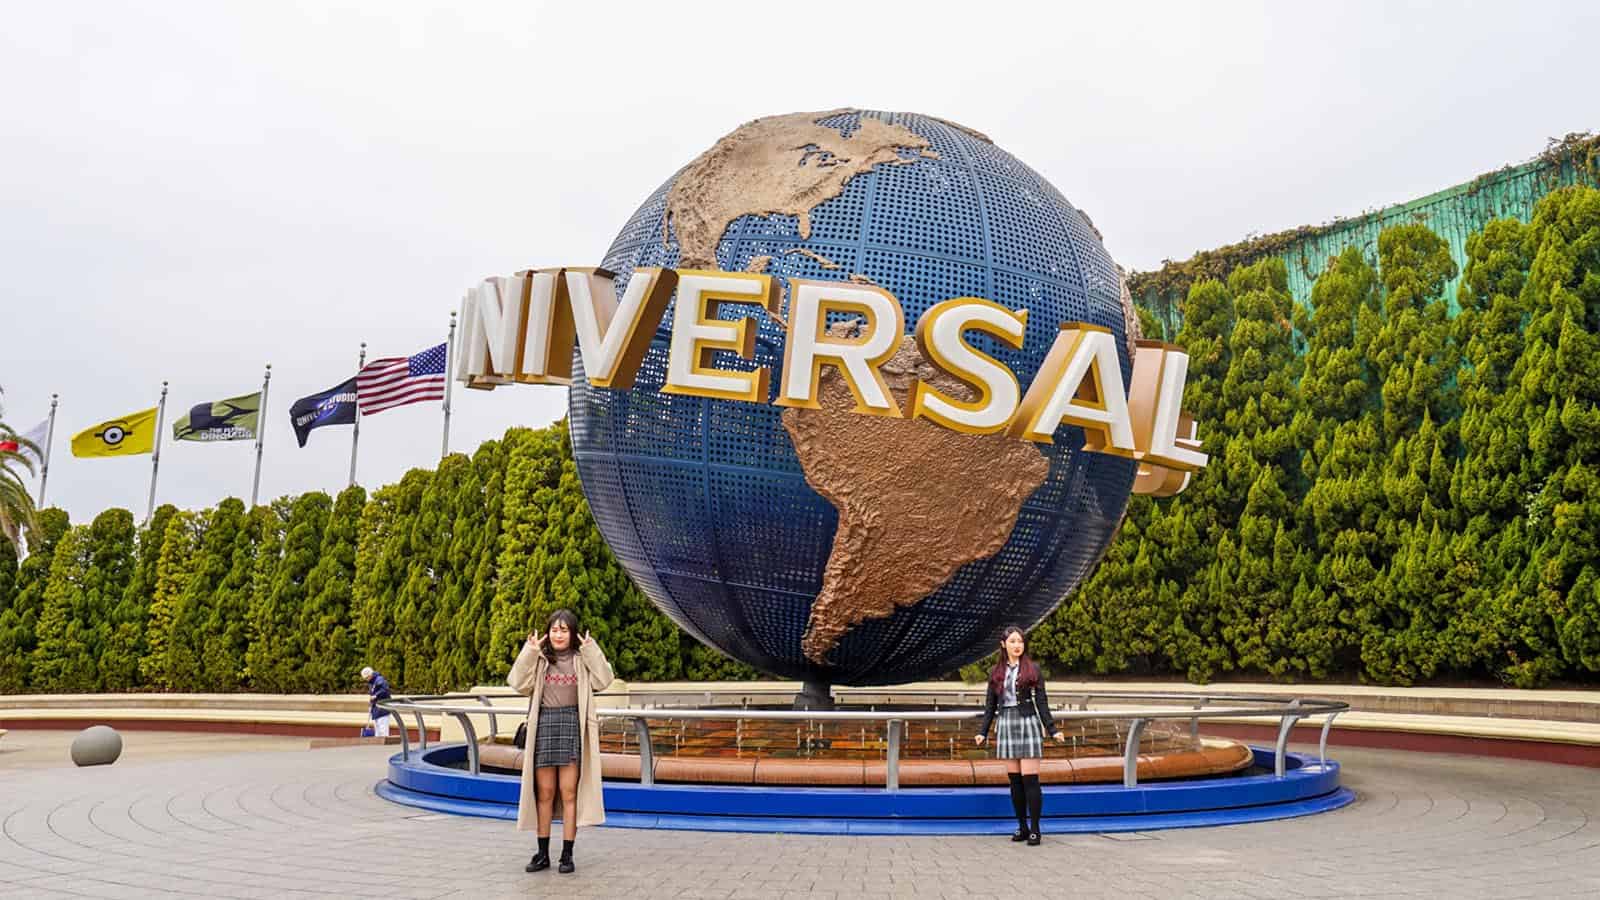 How to Get to UNIVERSAL STUDIOS JAPAN